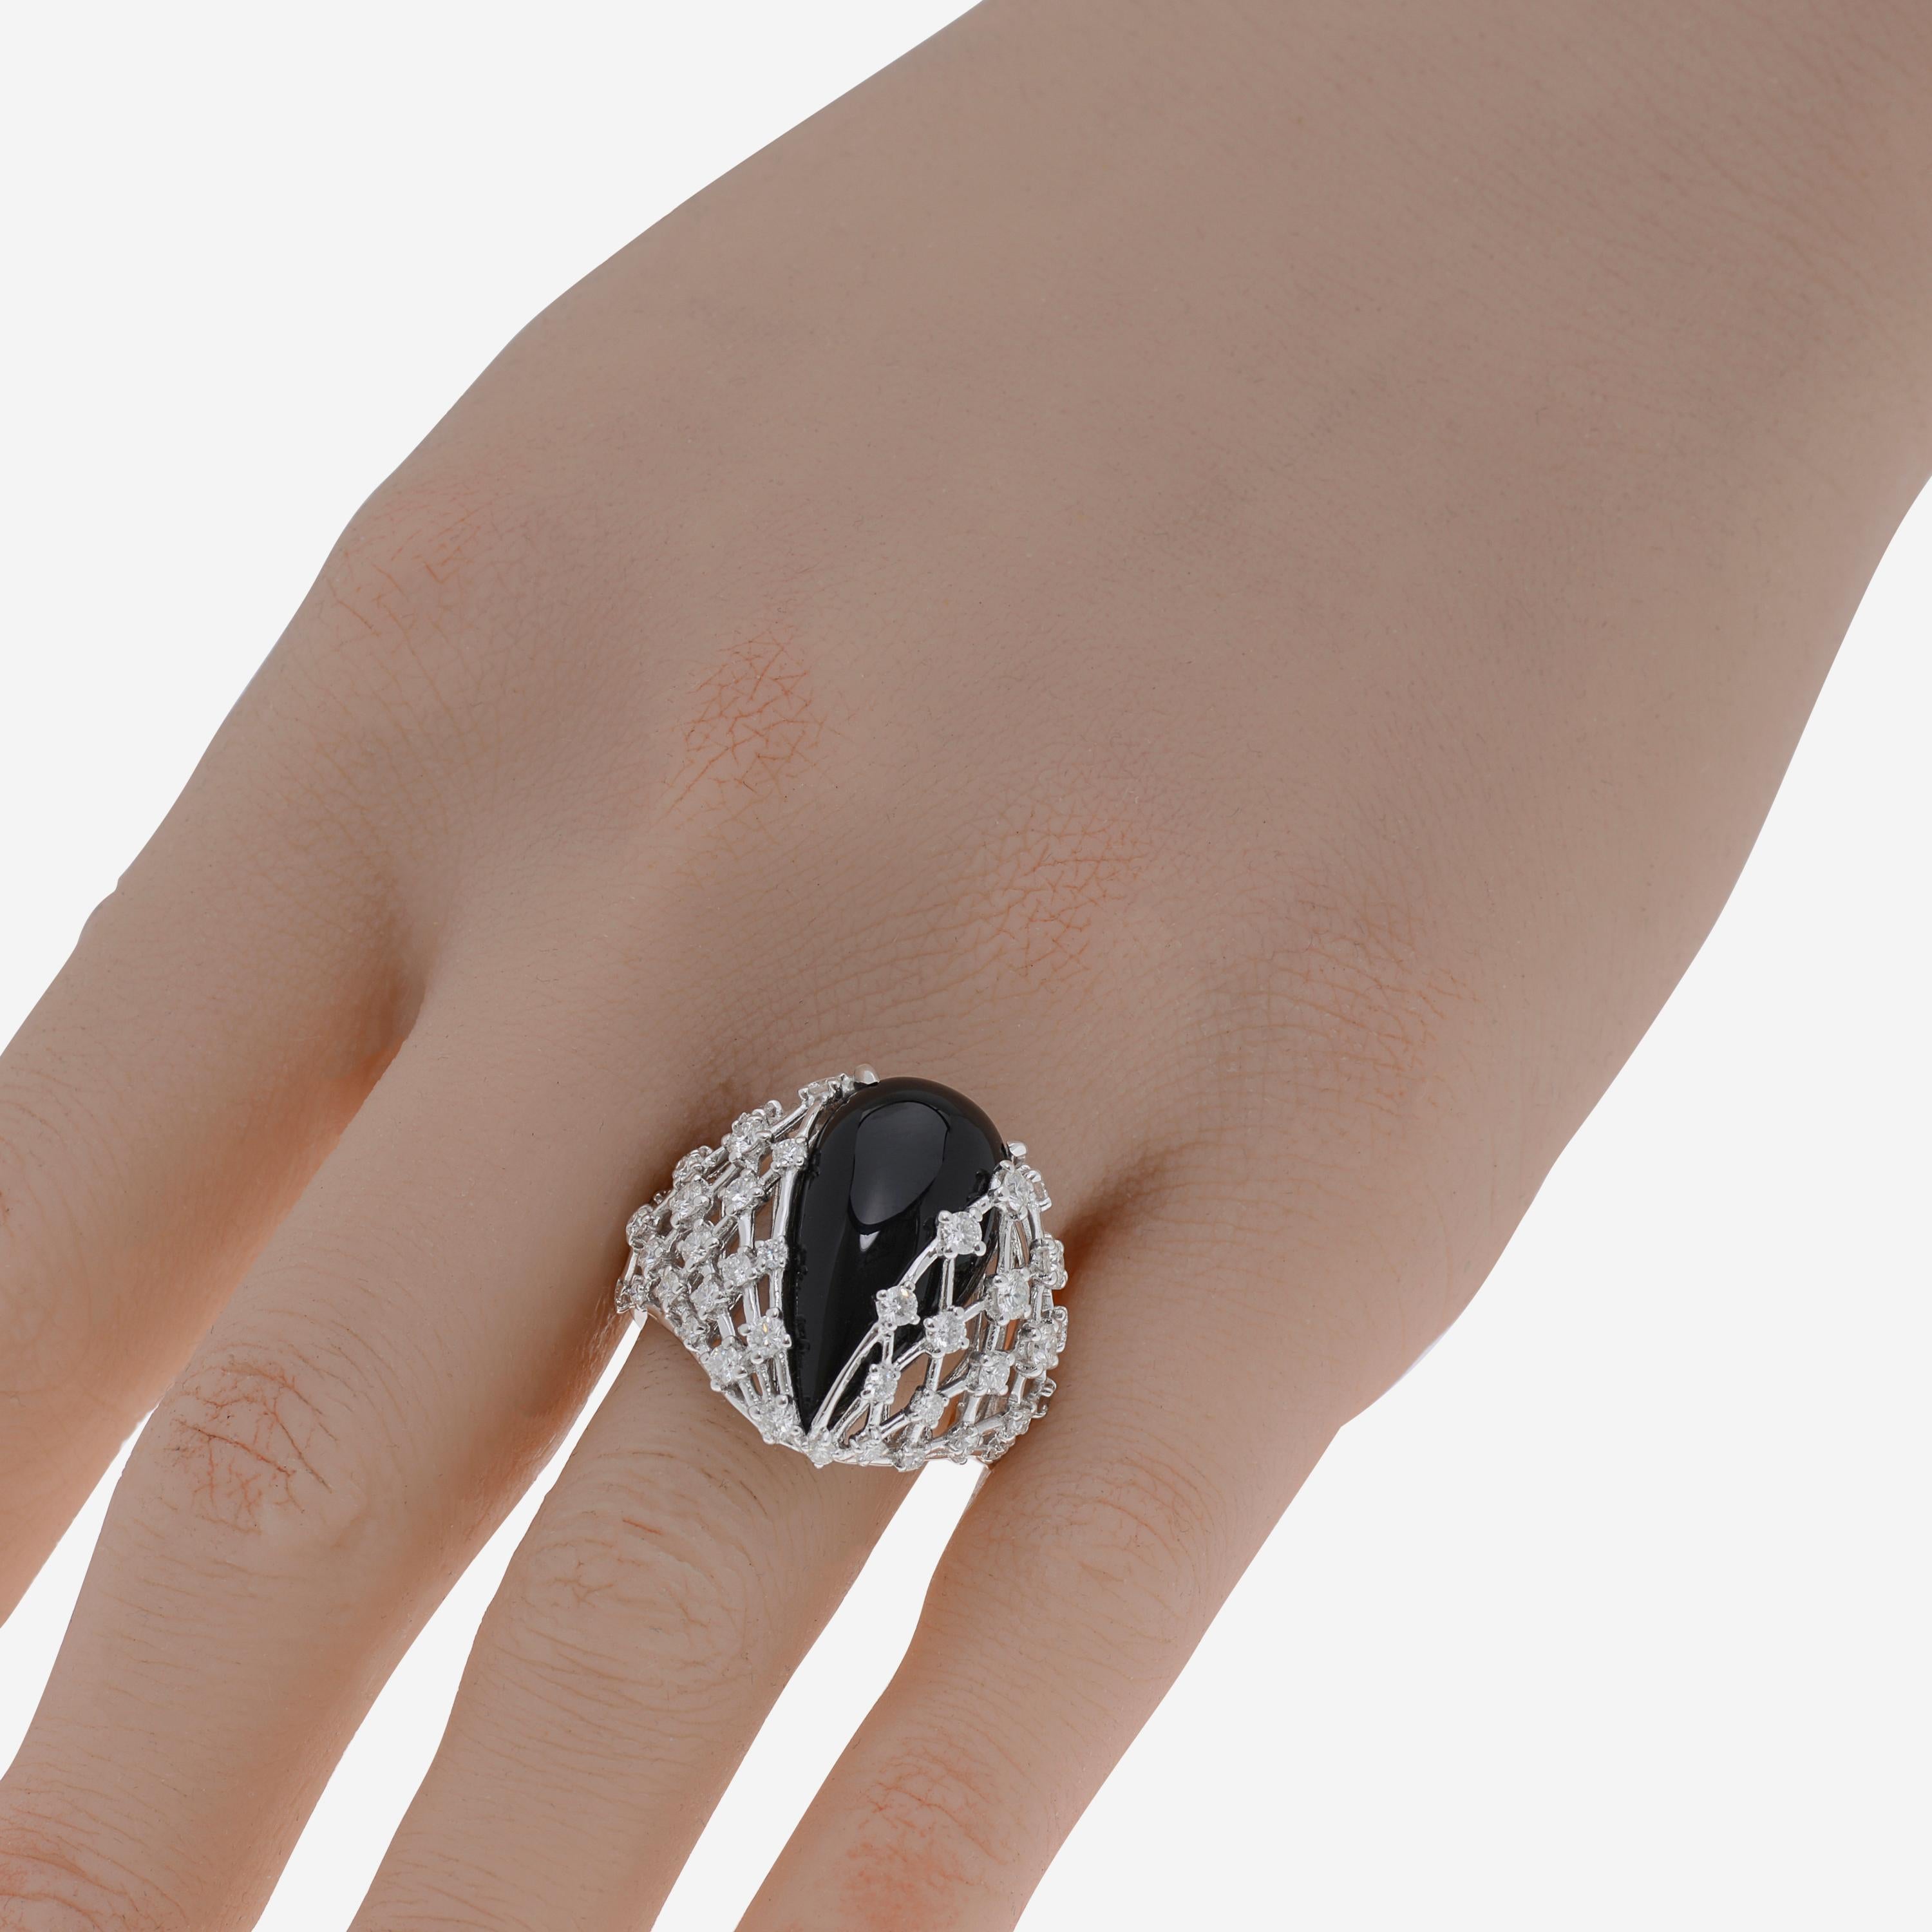 This adventurous Luca Carati 18K White Gold Cocktail Ring features shimmering 1.26ct. tw. prong set accent diamonds adorning an Onyx center. The ring size is 8.25 (57.7). The Band Width is 2.7mm. The Weight is 10g.
